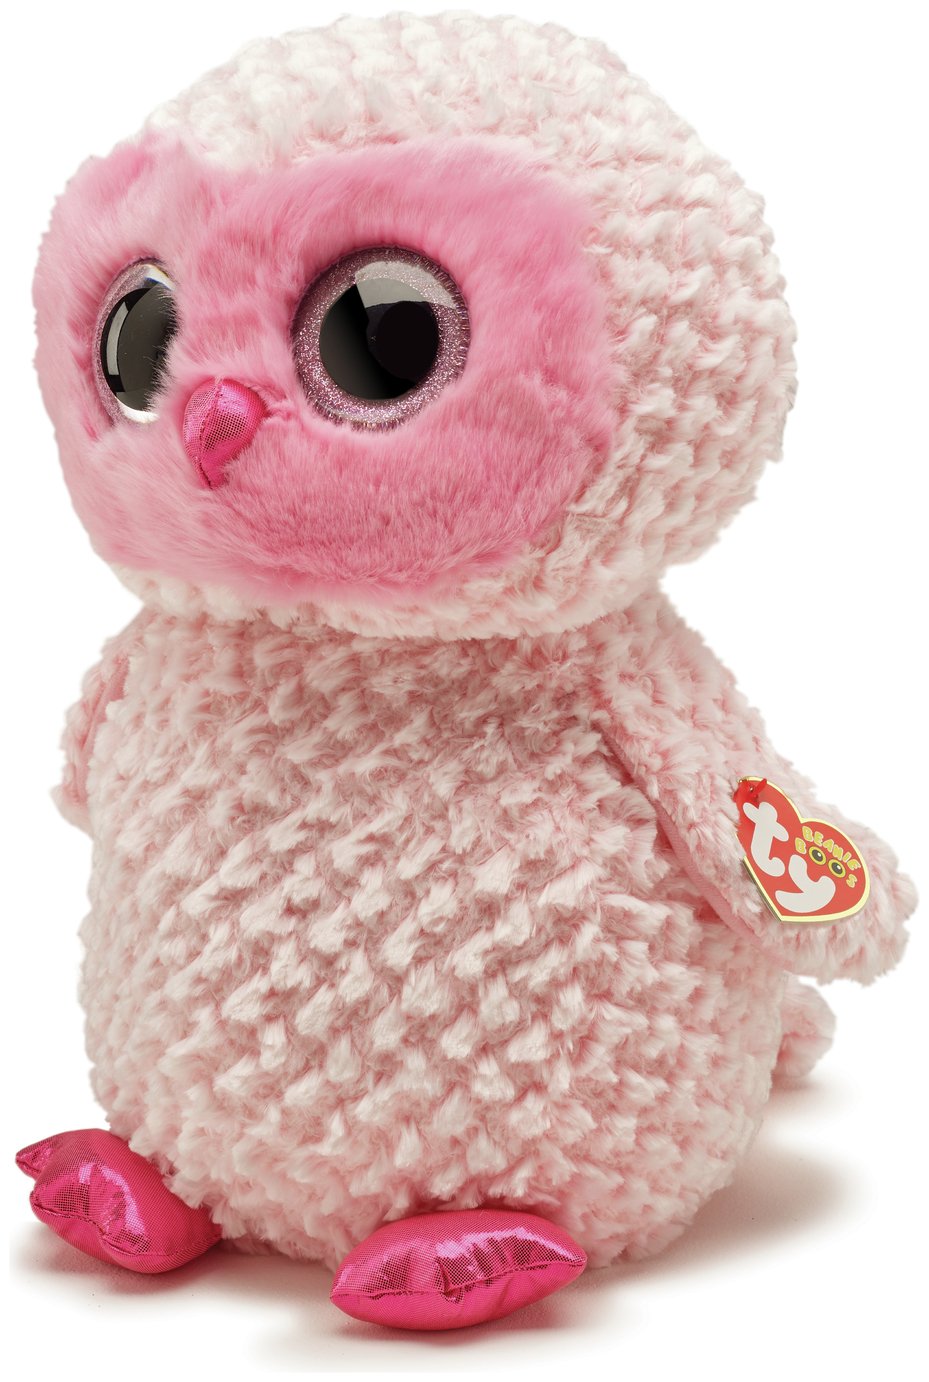 Ty Twiggy Large Beanie Boo Review